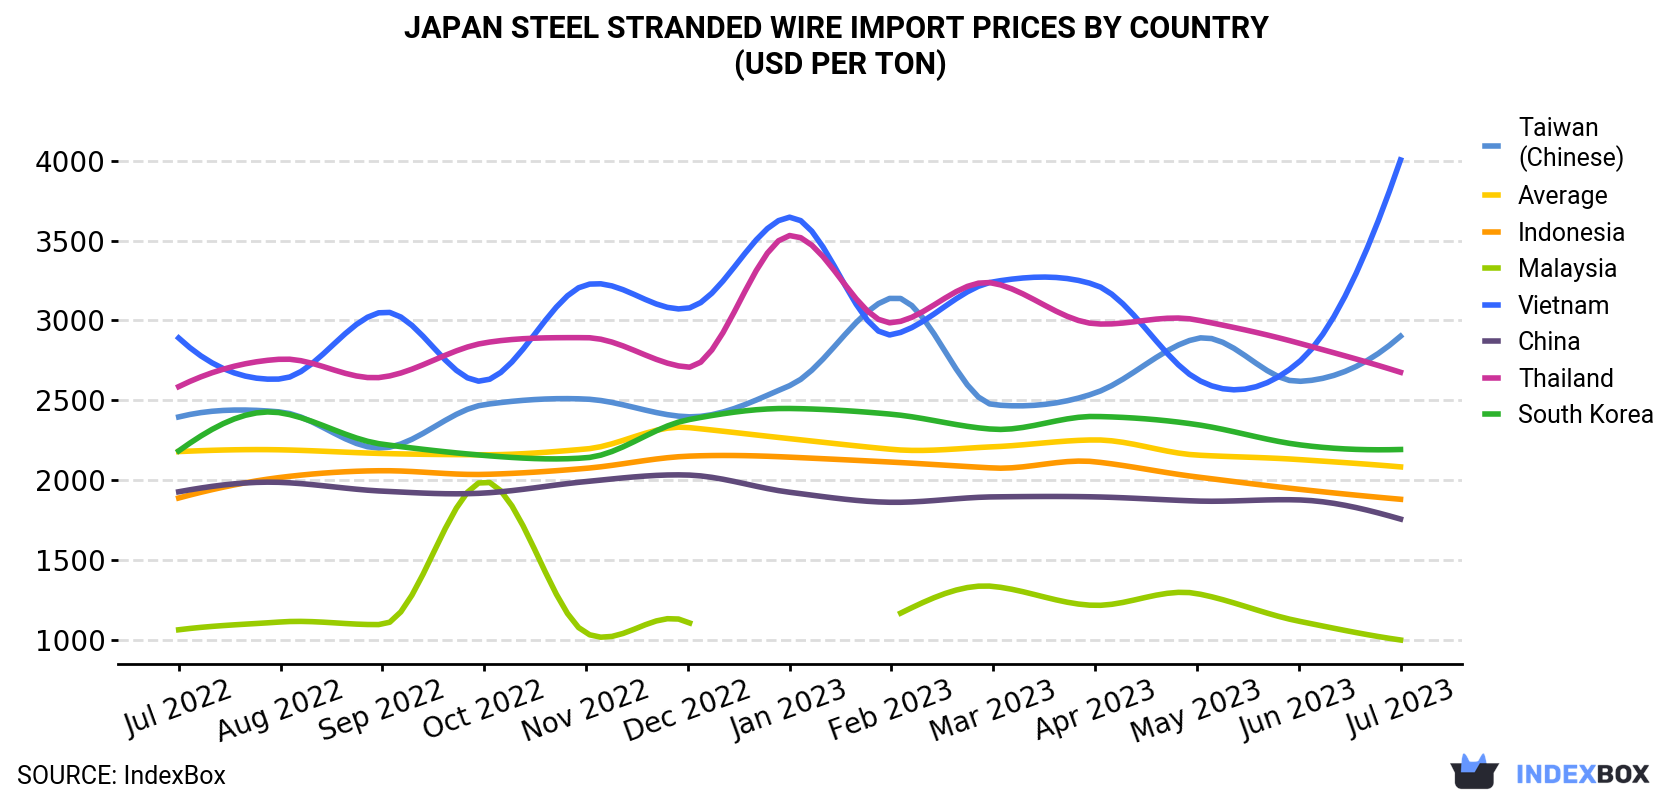 Japan Steel Stranded Wire Import Prices By Country (USD Per Ton)